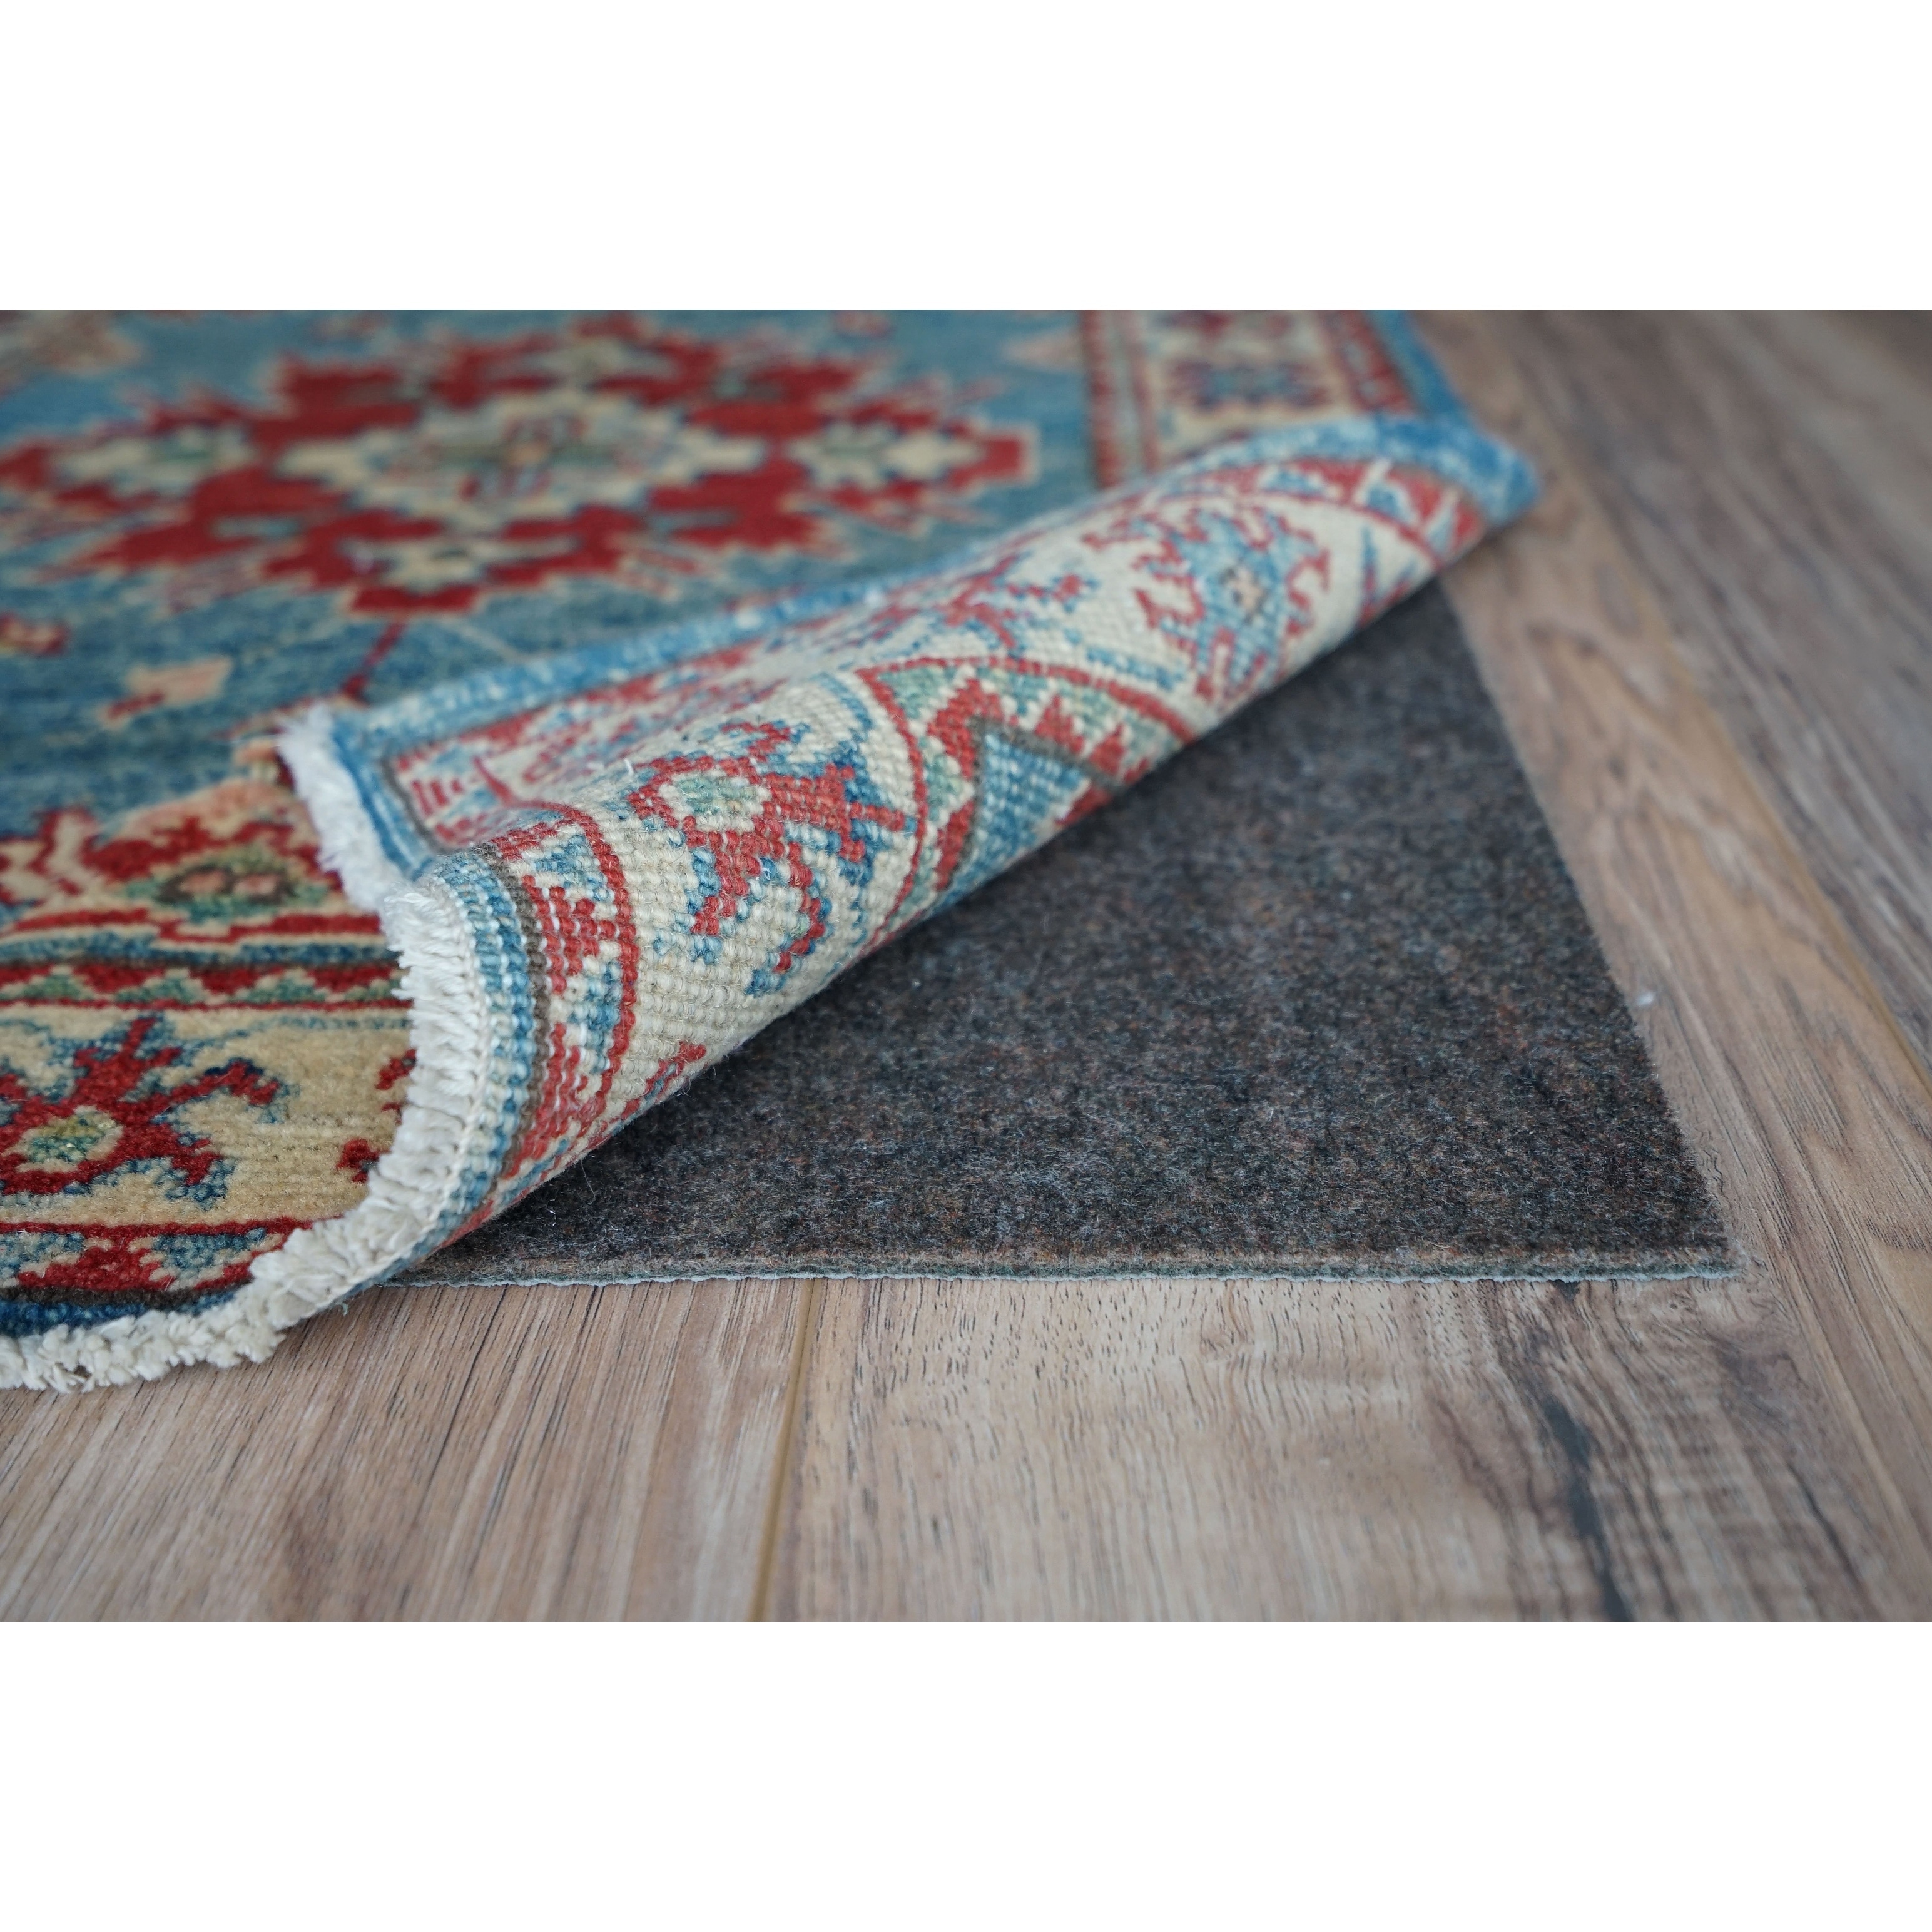 Superior-Lock 1/4 Felt Rug Pad, Non-Slip Made in USA Available to cut any  size